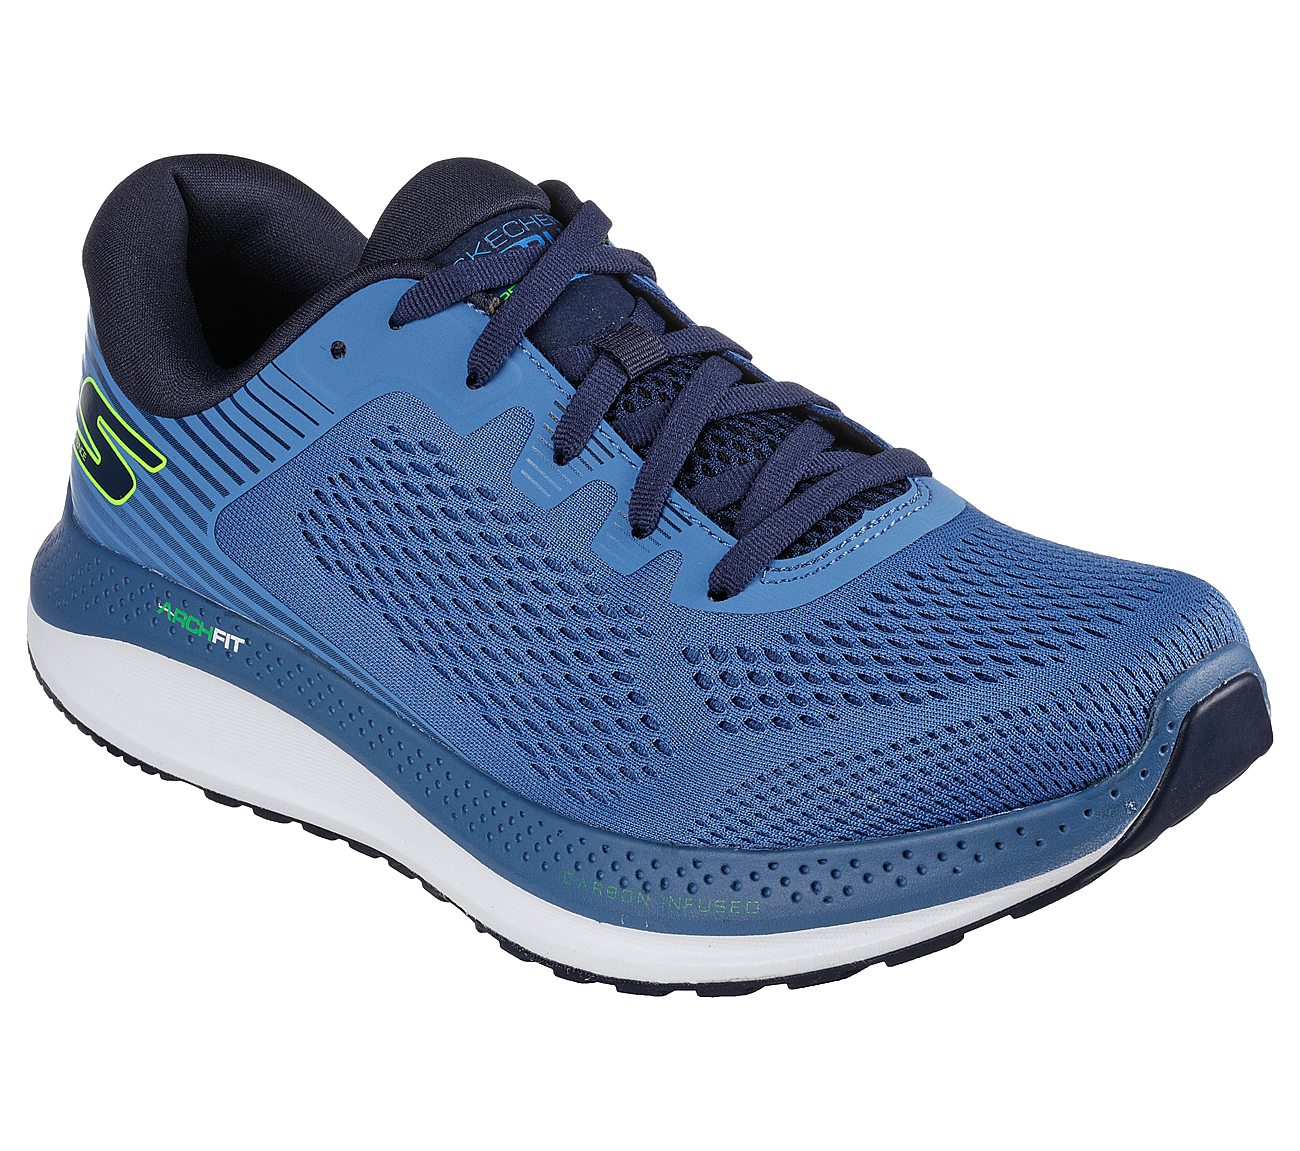 GO RUN PERSISTENCE, BLUE/LIME Footwear Lateral View